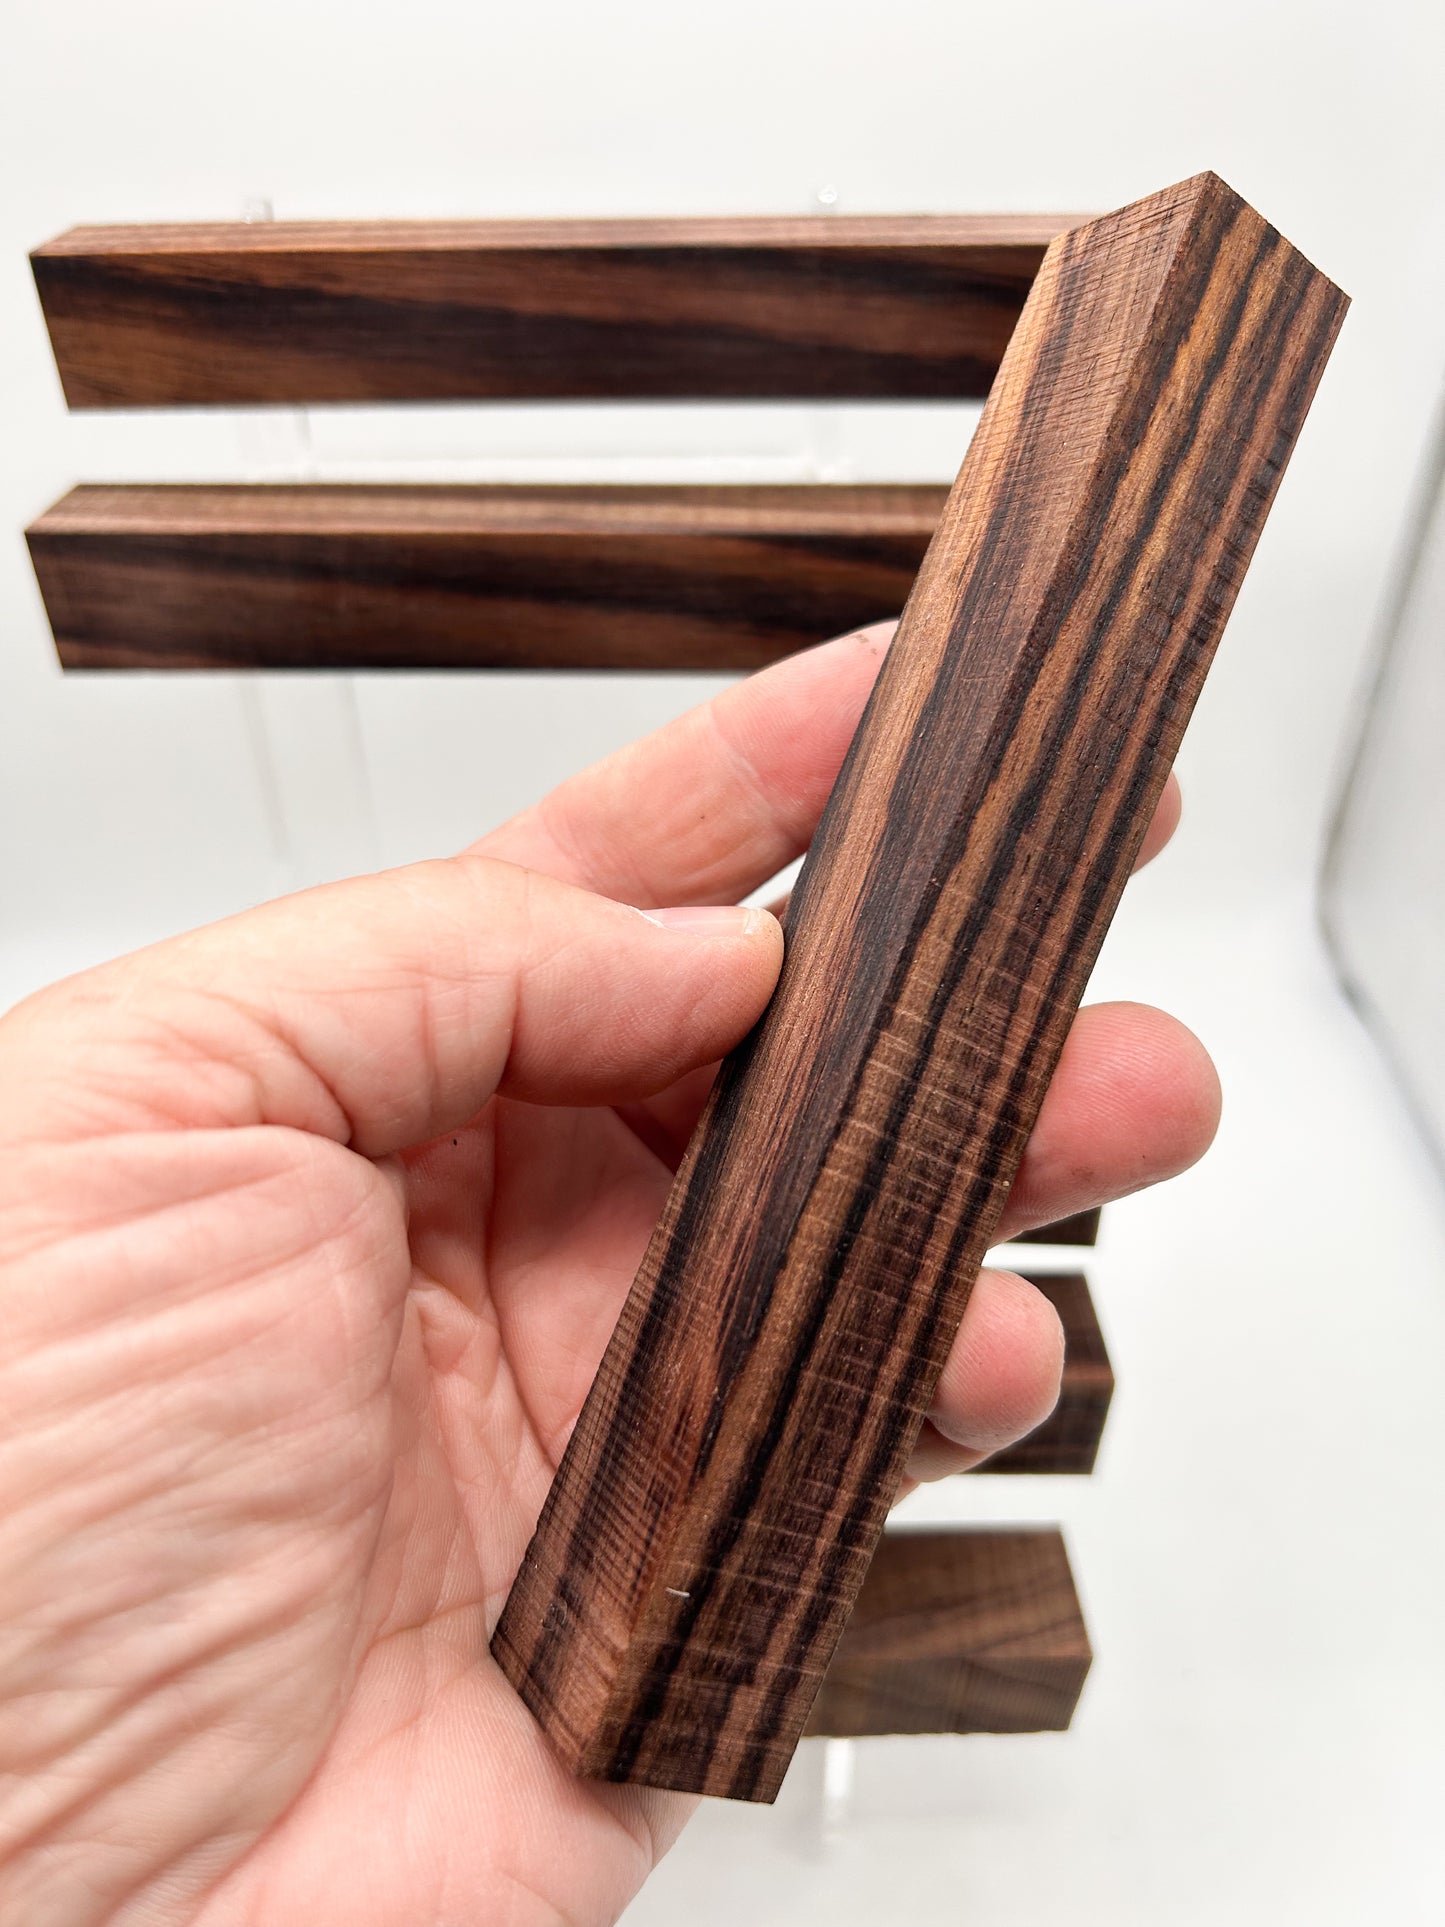 Indian Rosewood Wood | Wooden Pen Blanks